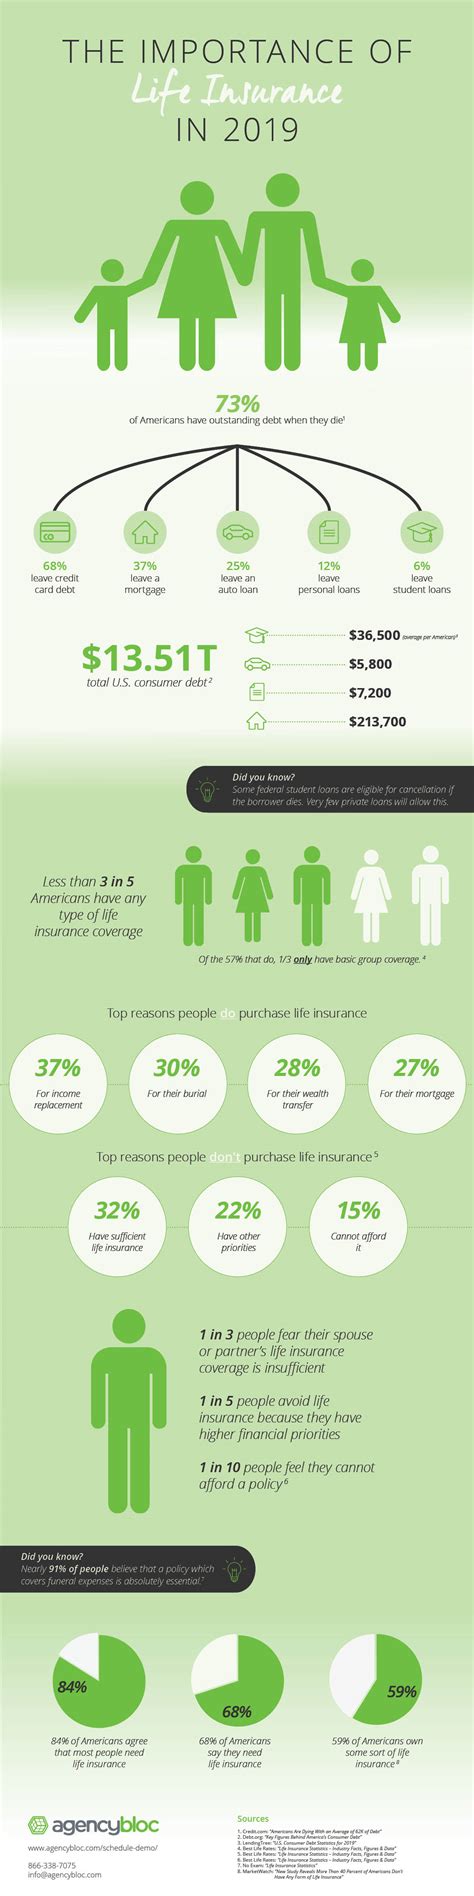 Life Insurance Infographic